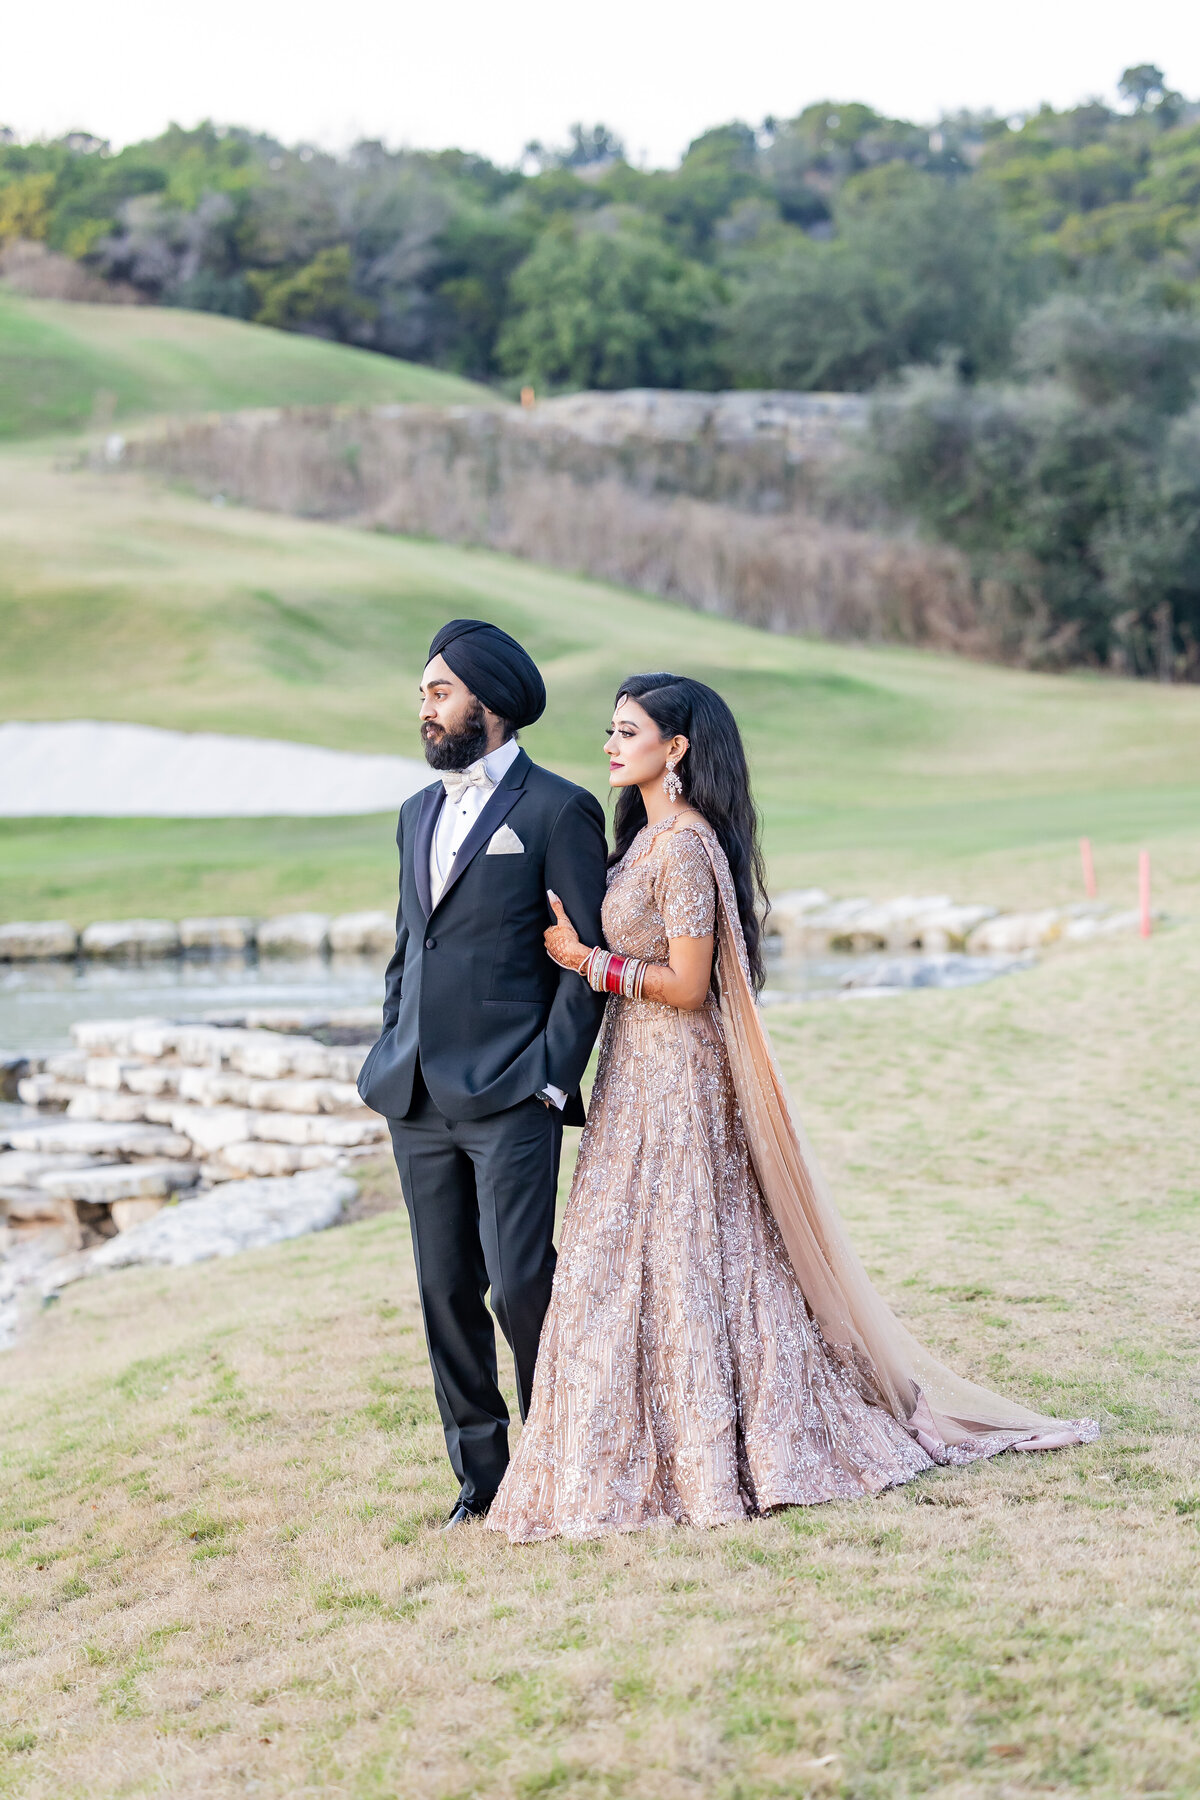 Bhuvana Dhinesh Photography is based out of Dallas, Houston and Austin, primarily out of Texas but available for travel across the nation.